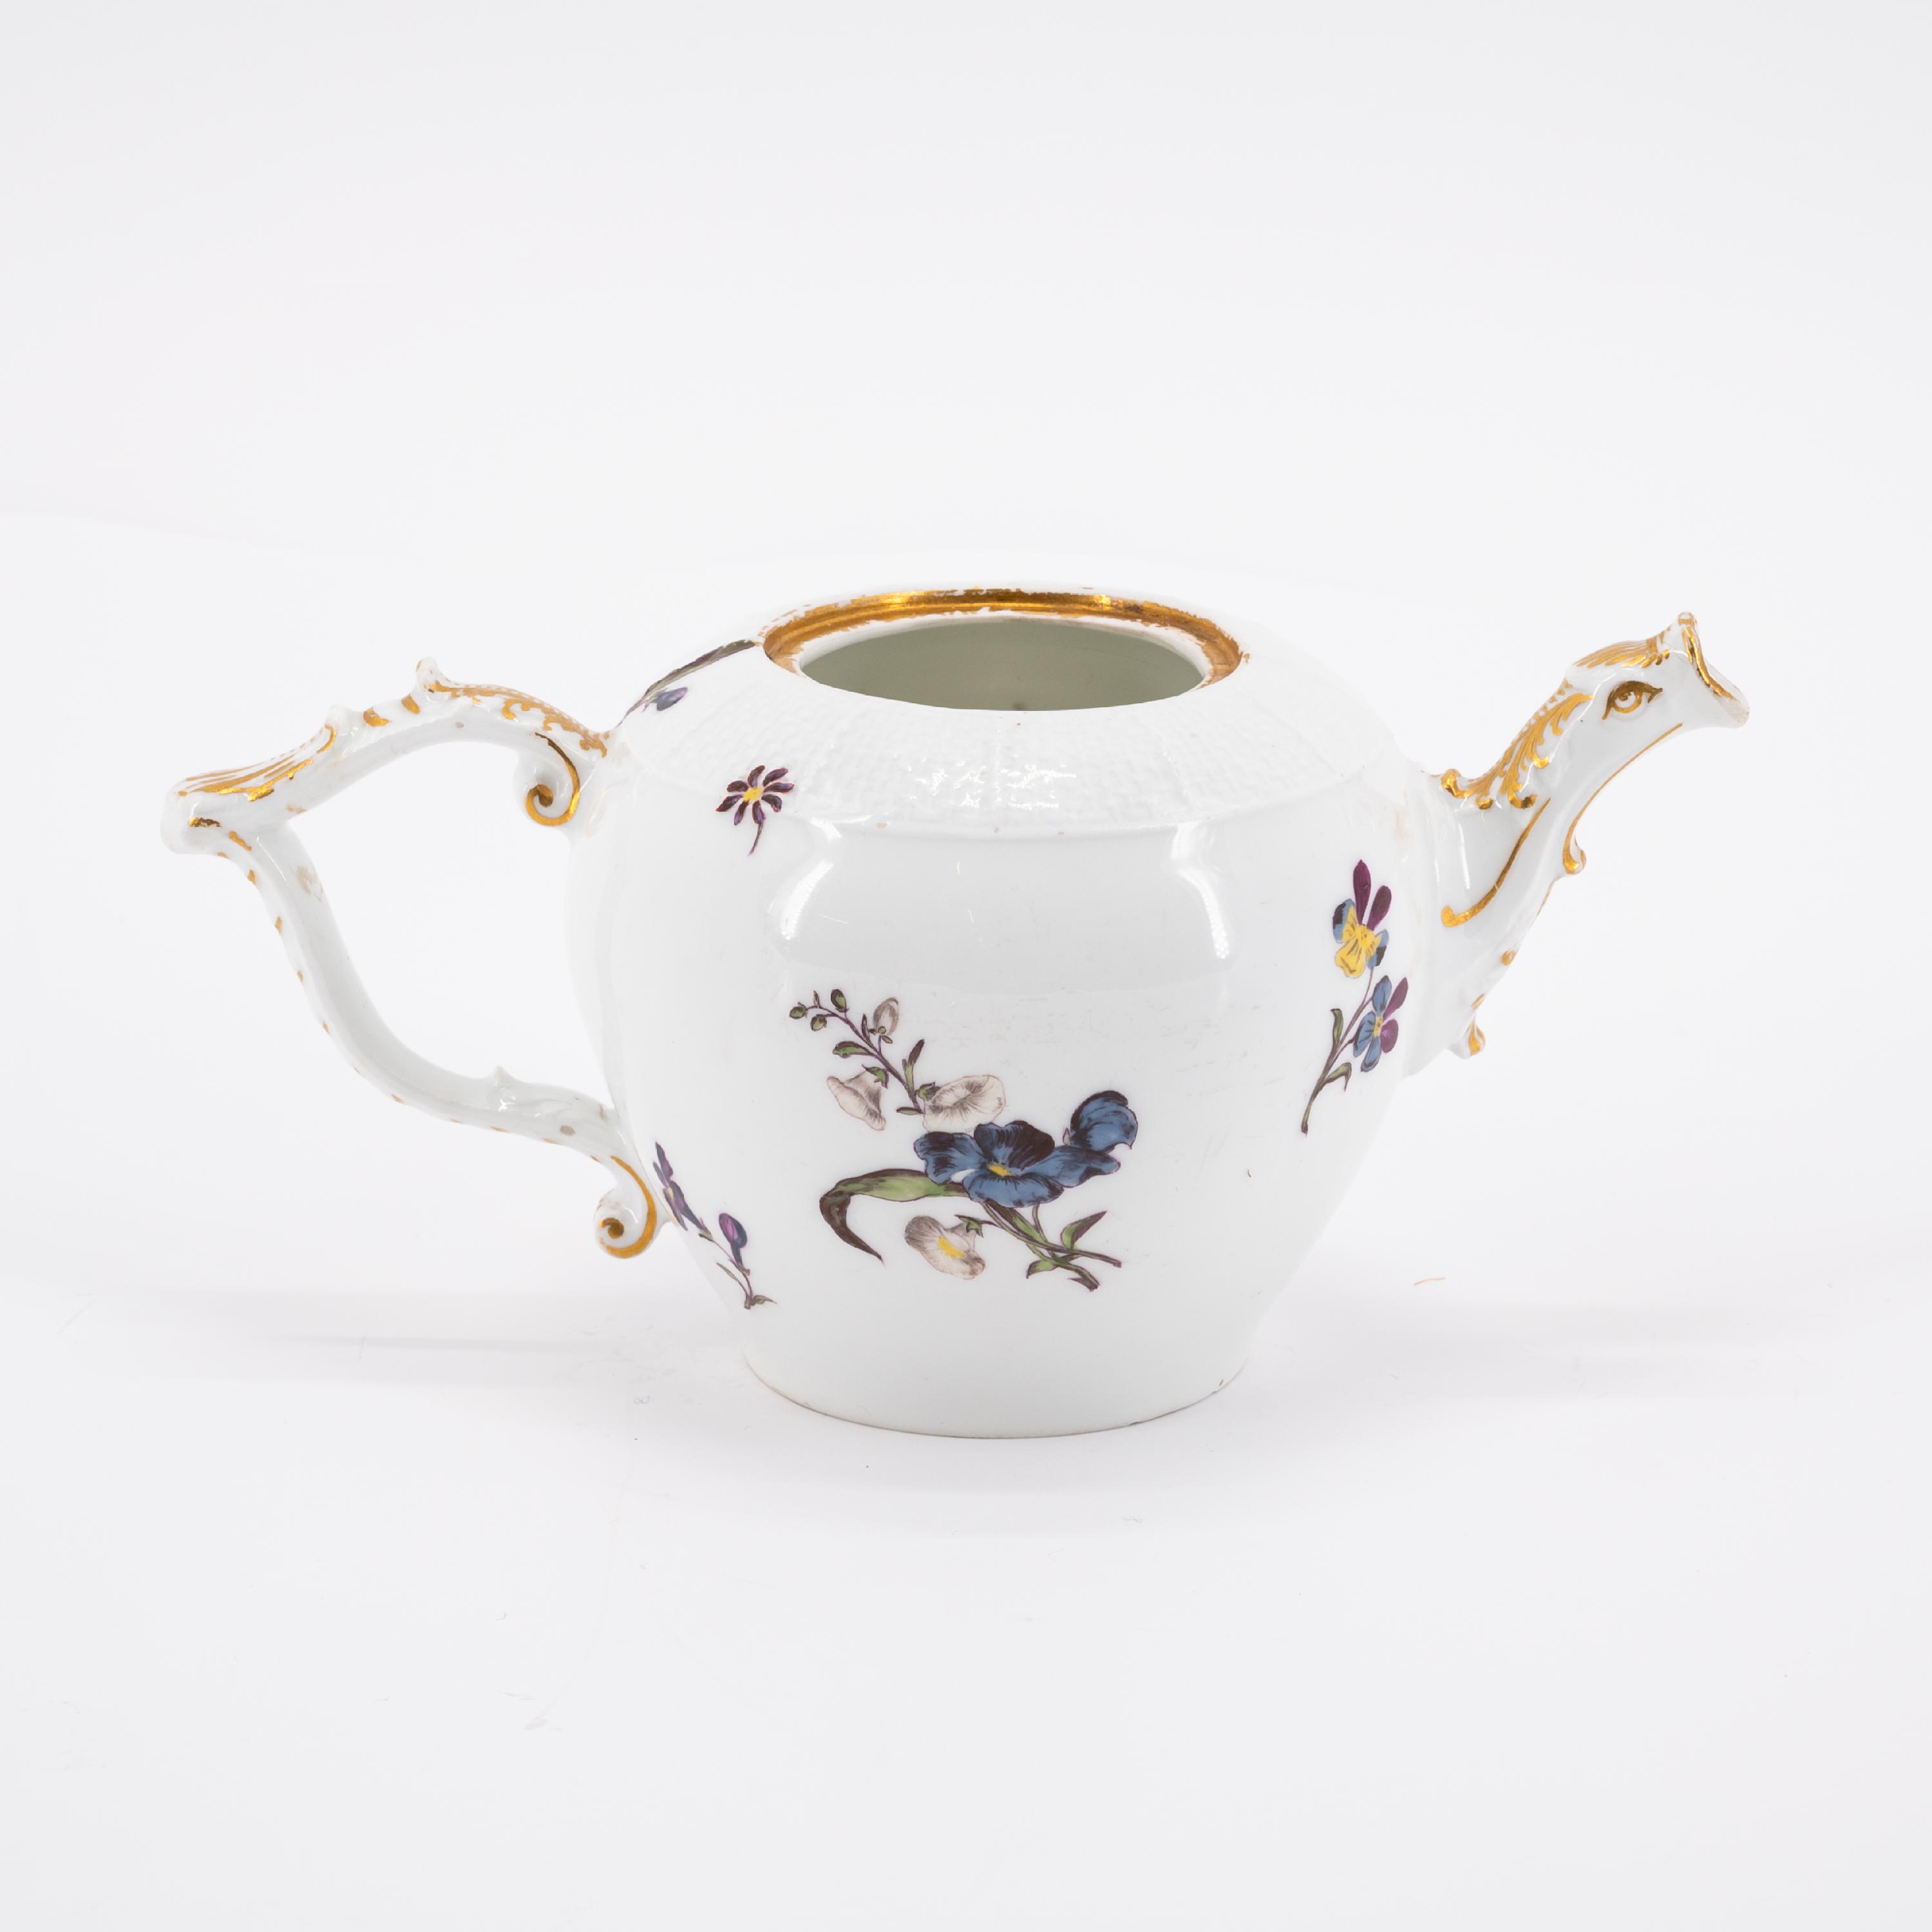 LARGE PORCELAIN LIDDED BOWL WITH FLOWER KNOB, SMALL TEA POT WITH WOODCUT FLOWERS AND CUP WITH SAUCER - Image 8 of 18